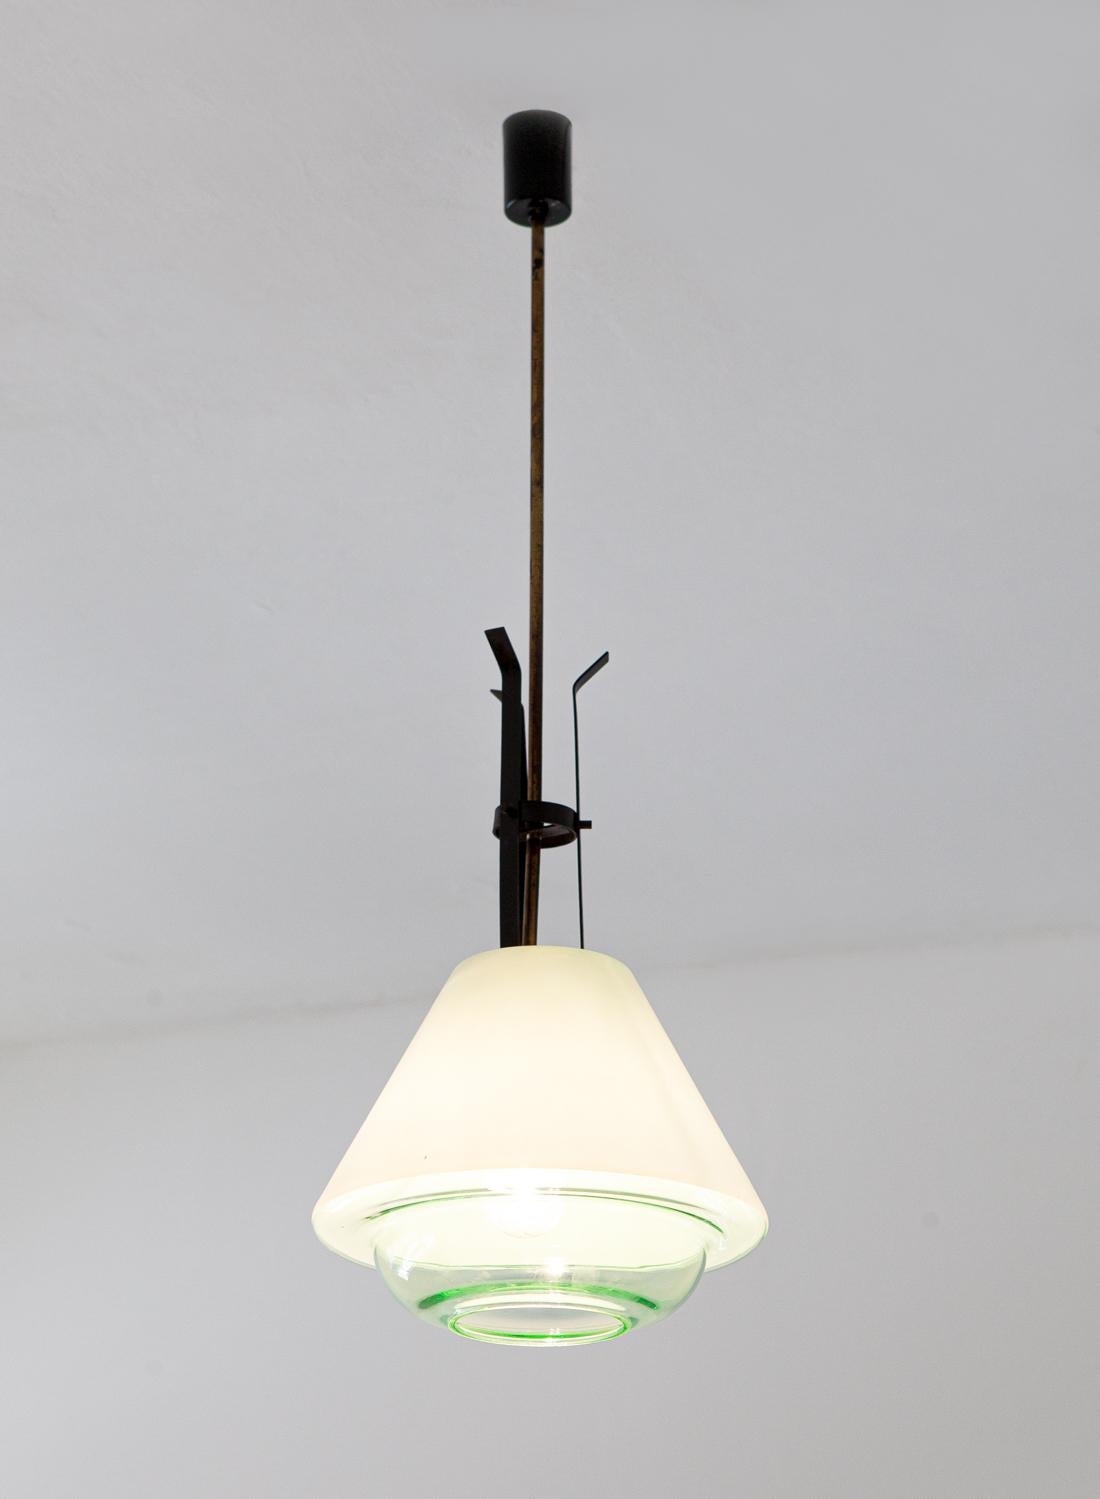 Italian Mid-Century Modern Ceiling Lamp, Brass, Opaline Glass, 1950s In Good Condition For Sale In Rome, IT